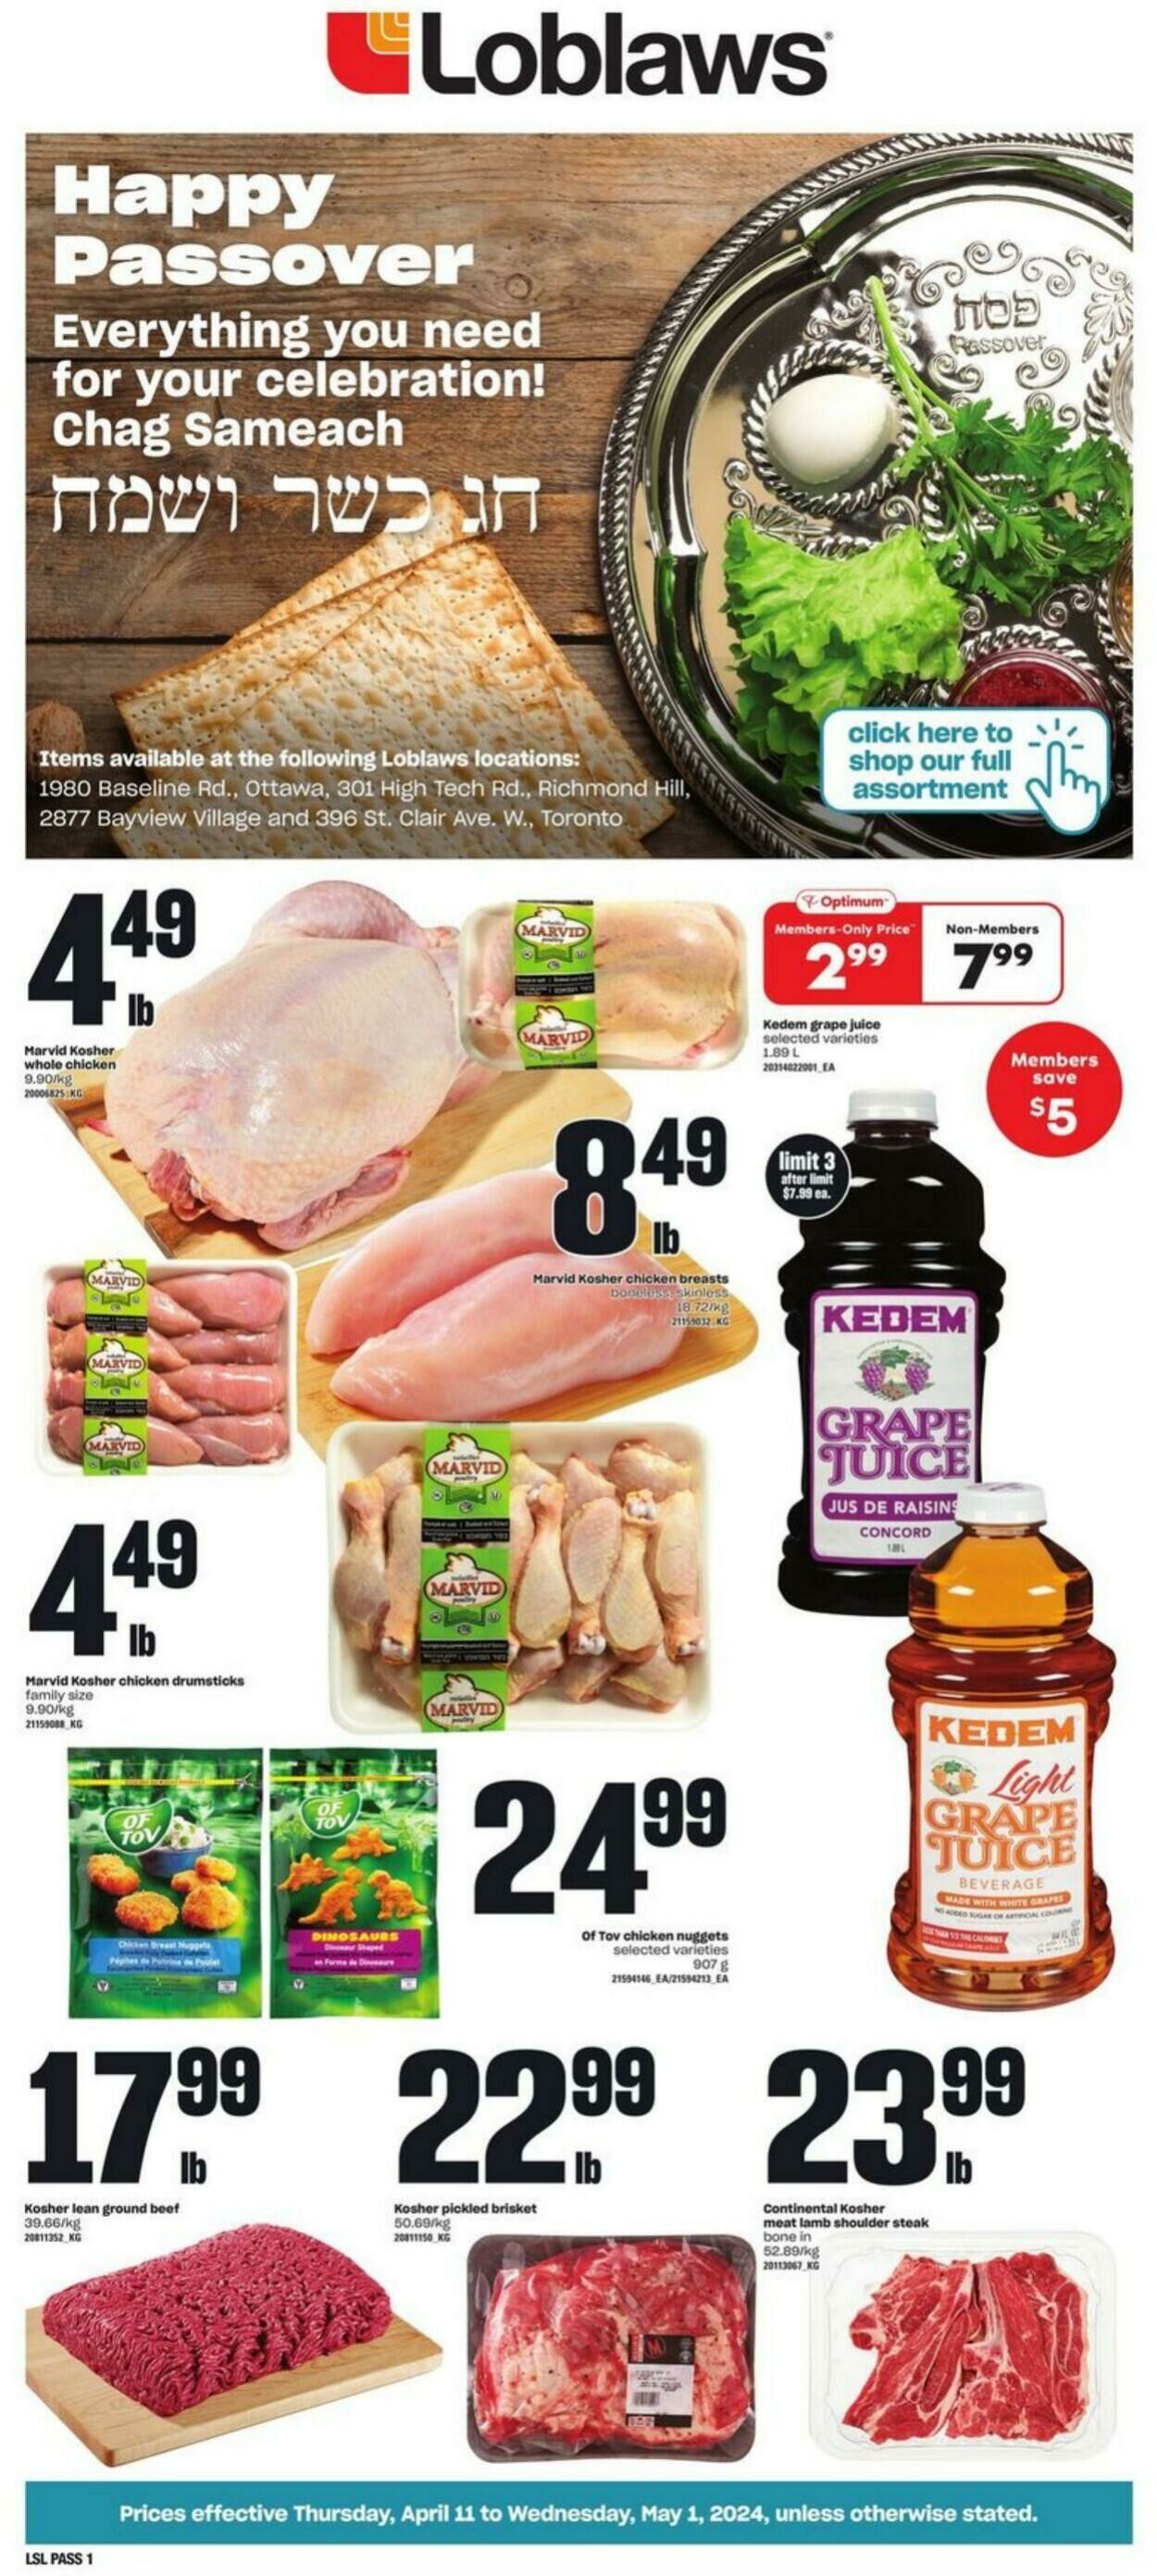 Loblaws Promotional flyers